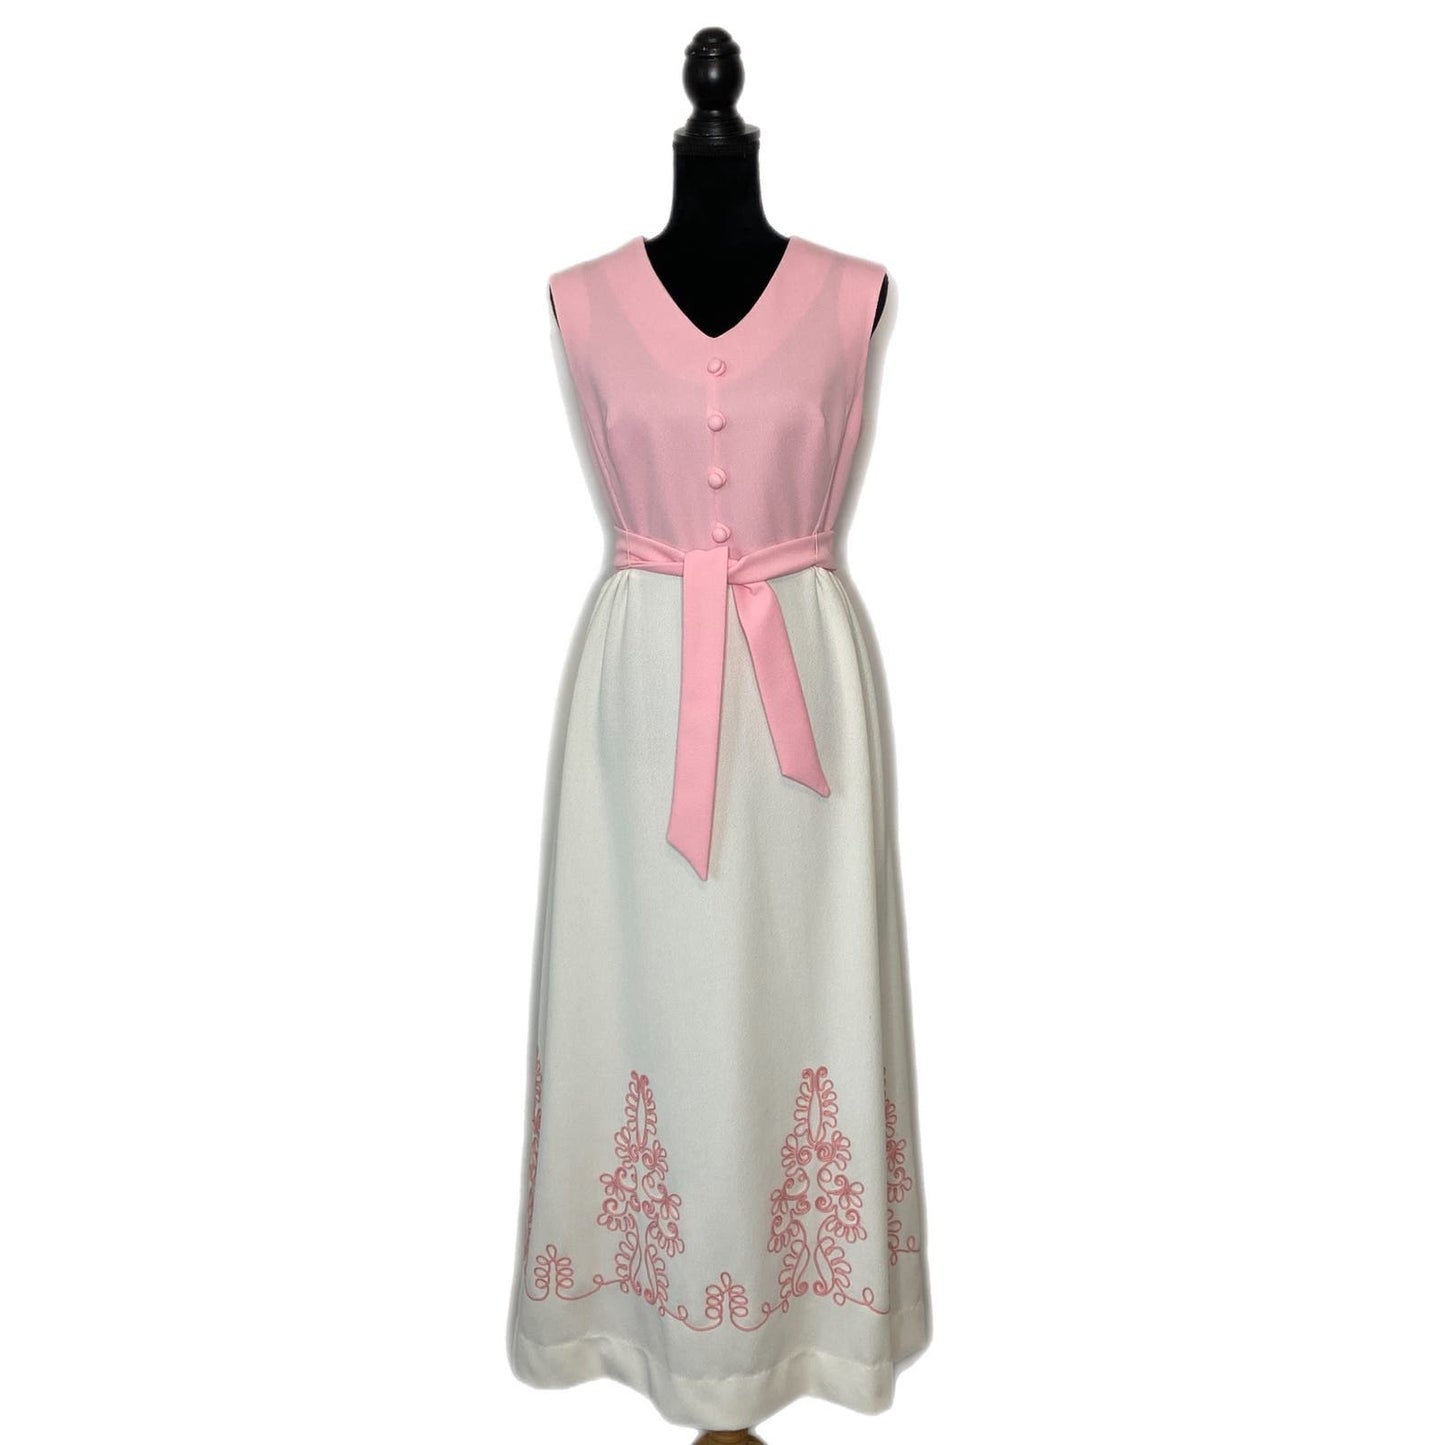 Vintage 1960's Edith Flagg Pink and White Sleeveless Dress - Women's Size 10